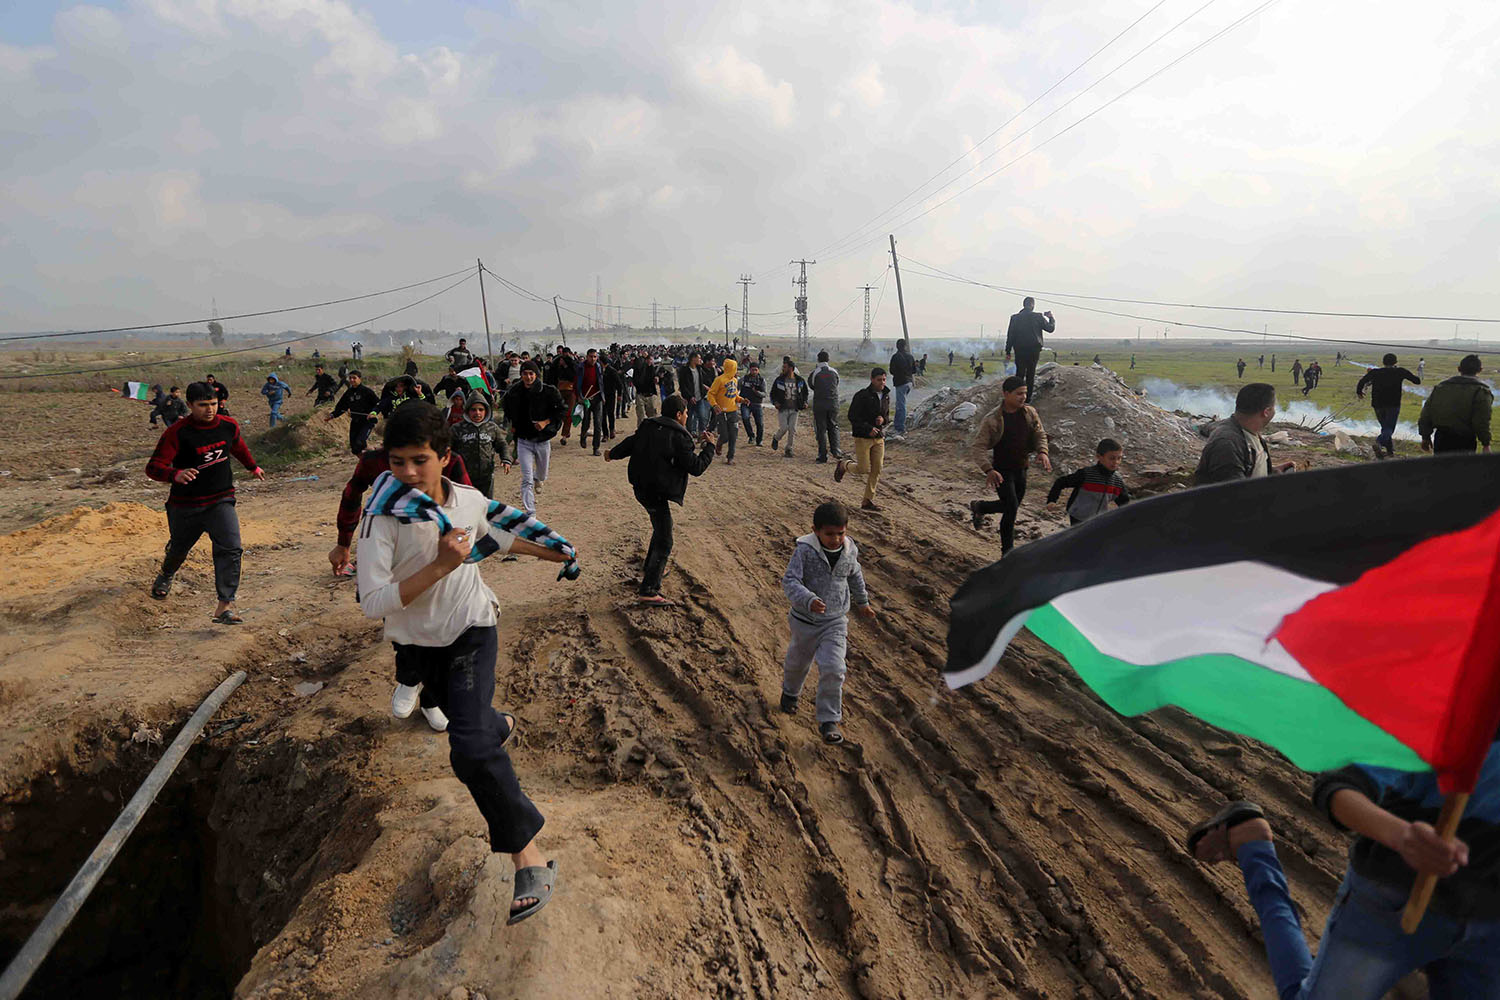 Jan. 17, 2014. Palestinian youth clash with Israeli security forces a protest in Nahal Oz, east of Gaza City.